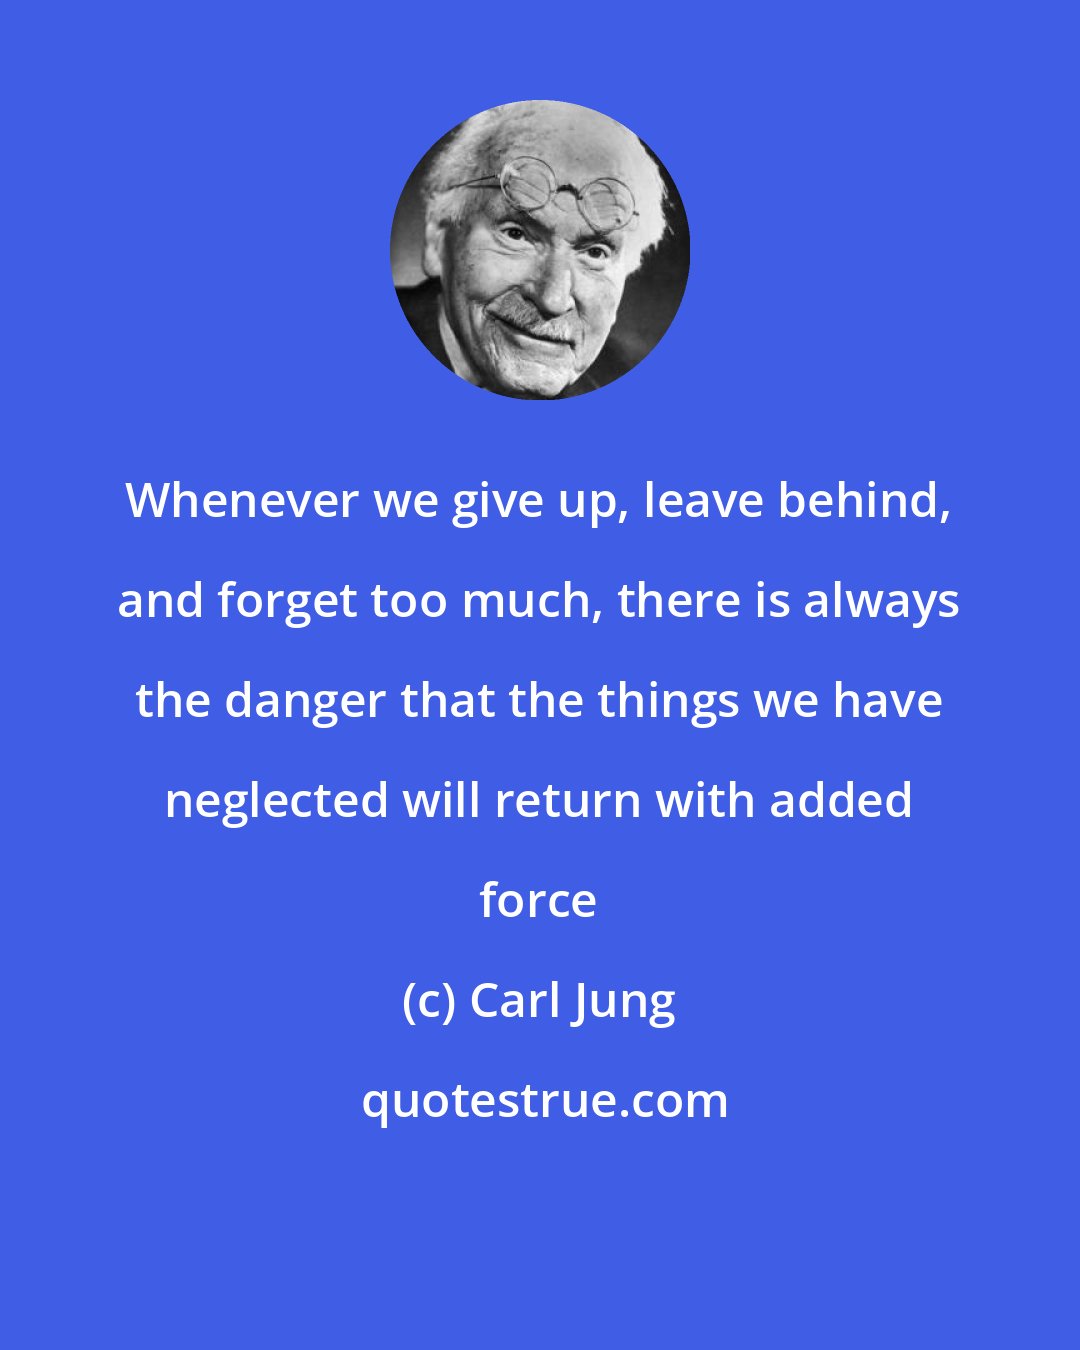 Carl Jung: Whenever we give up, leave behind, and forget too much, there is always the danger that the things we have neglected will return with added force